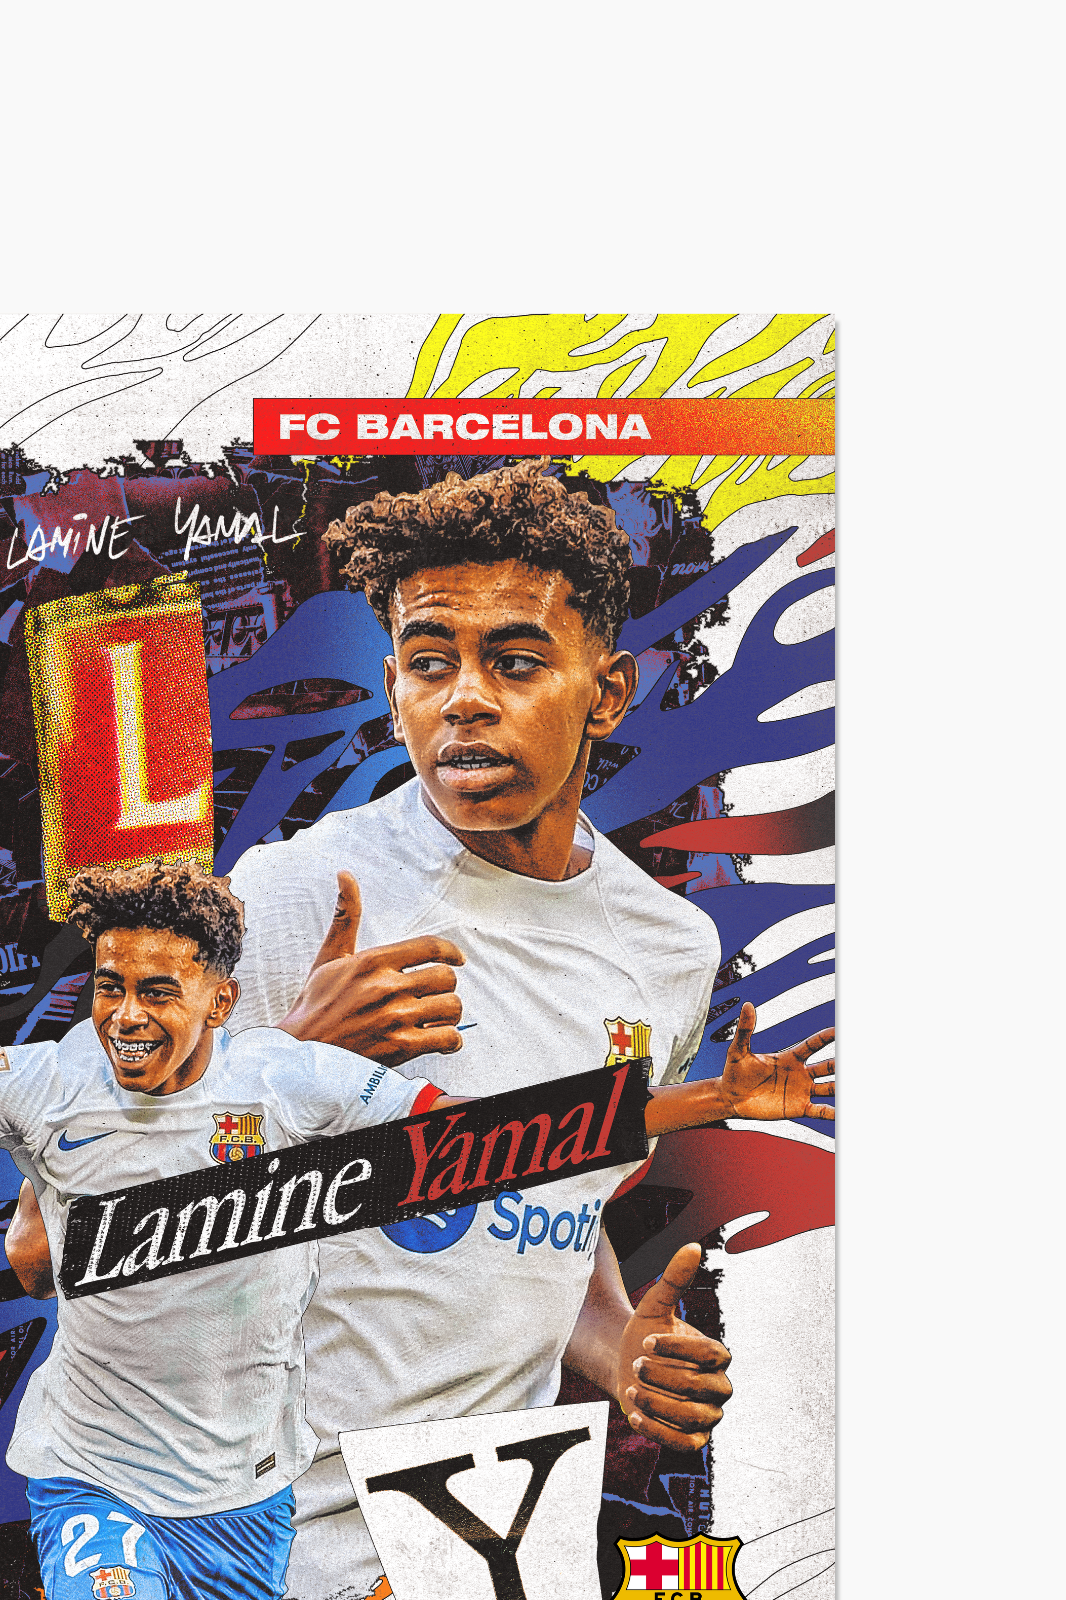 FC Barcelona - Poster Lamine Yamal 999 exemplaires